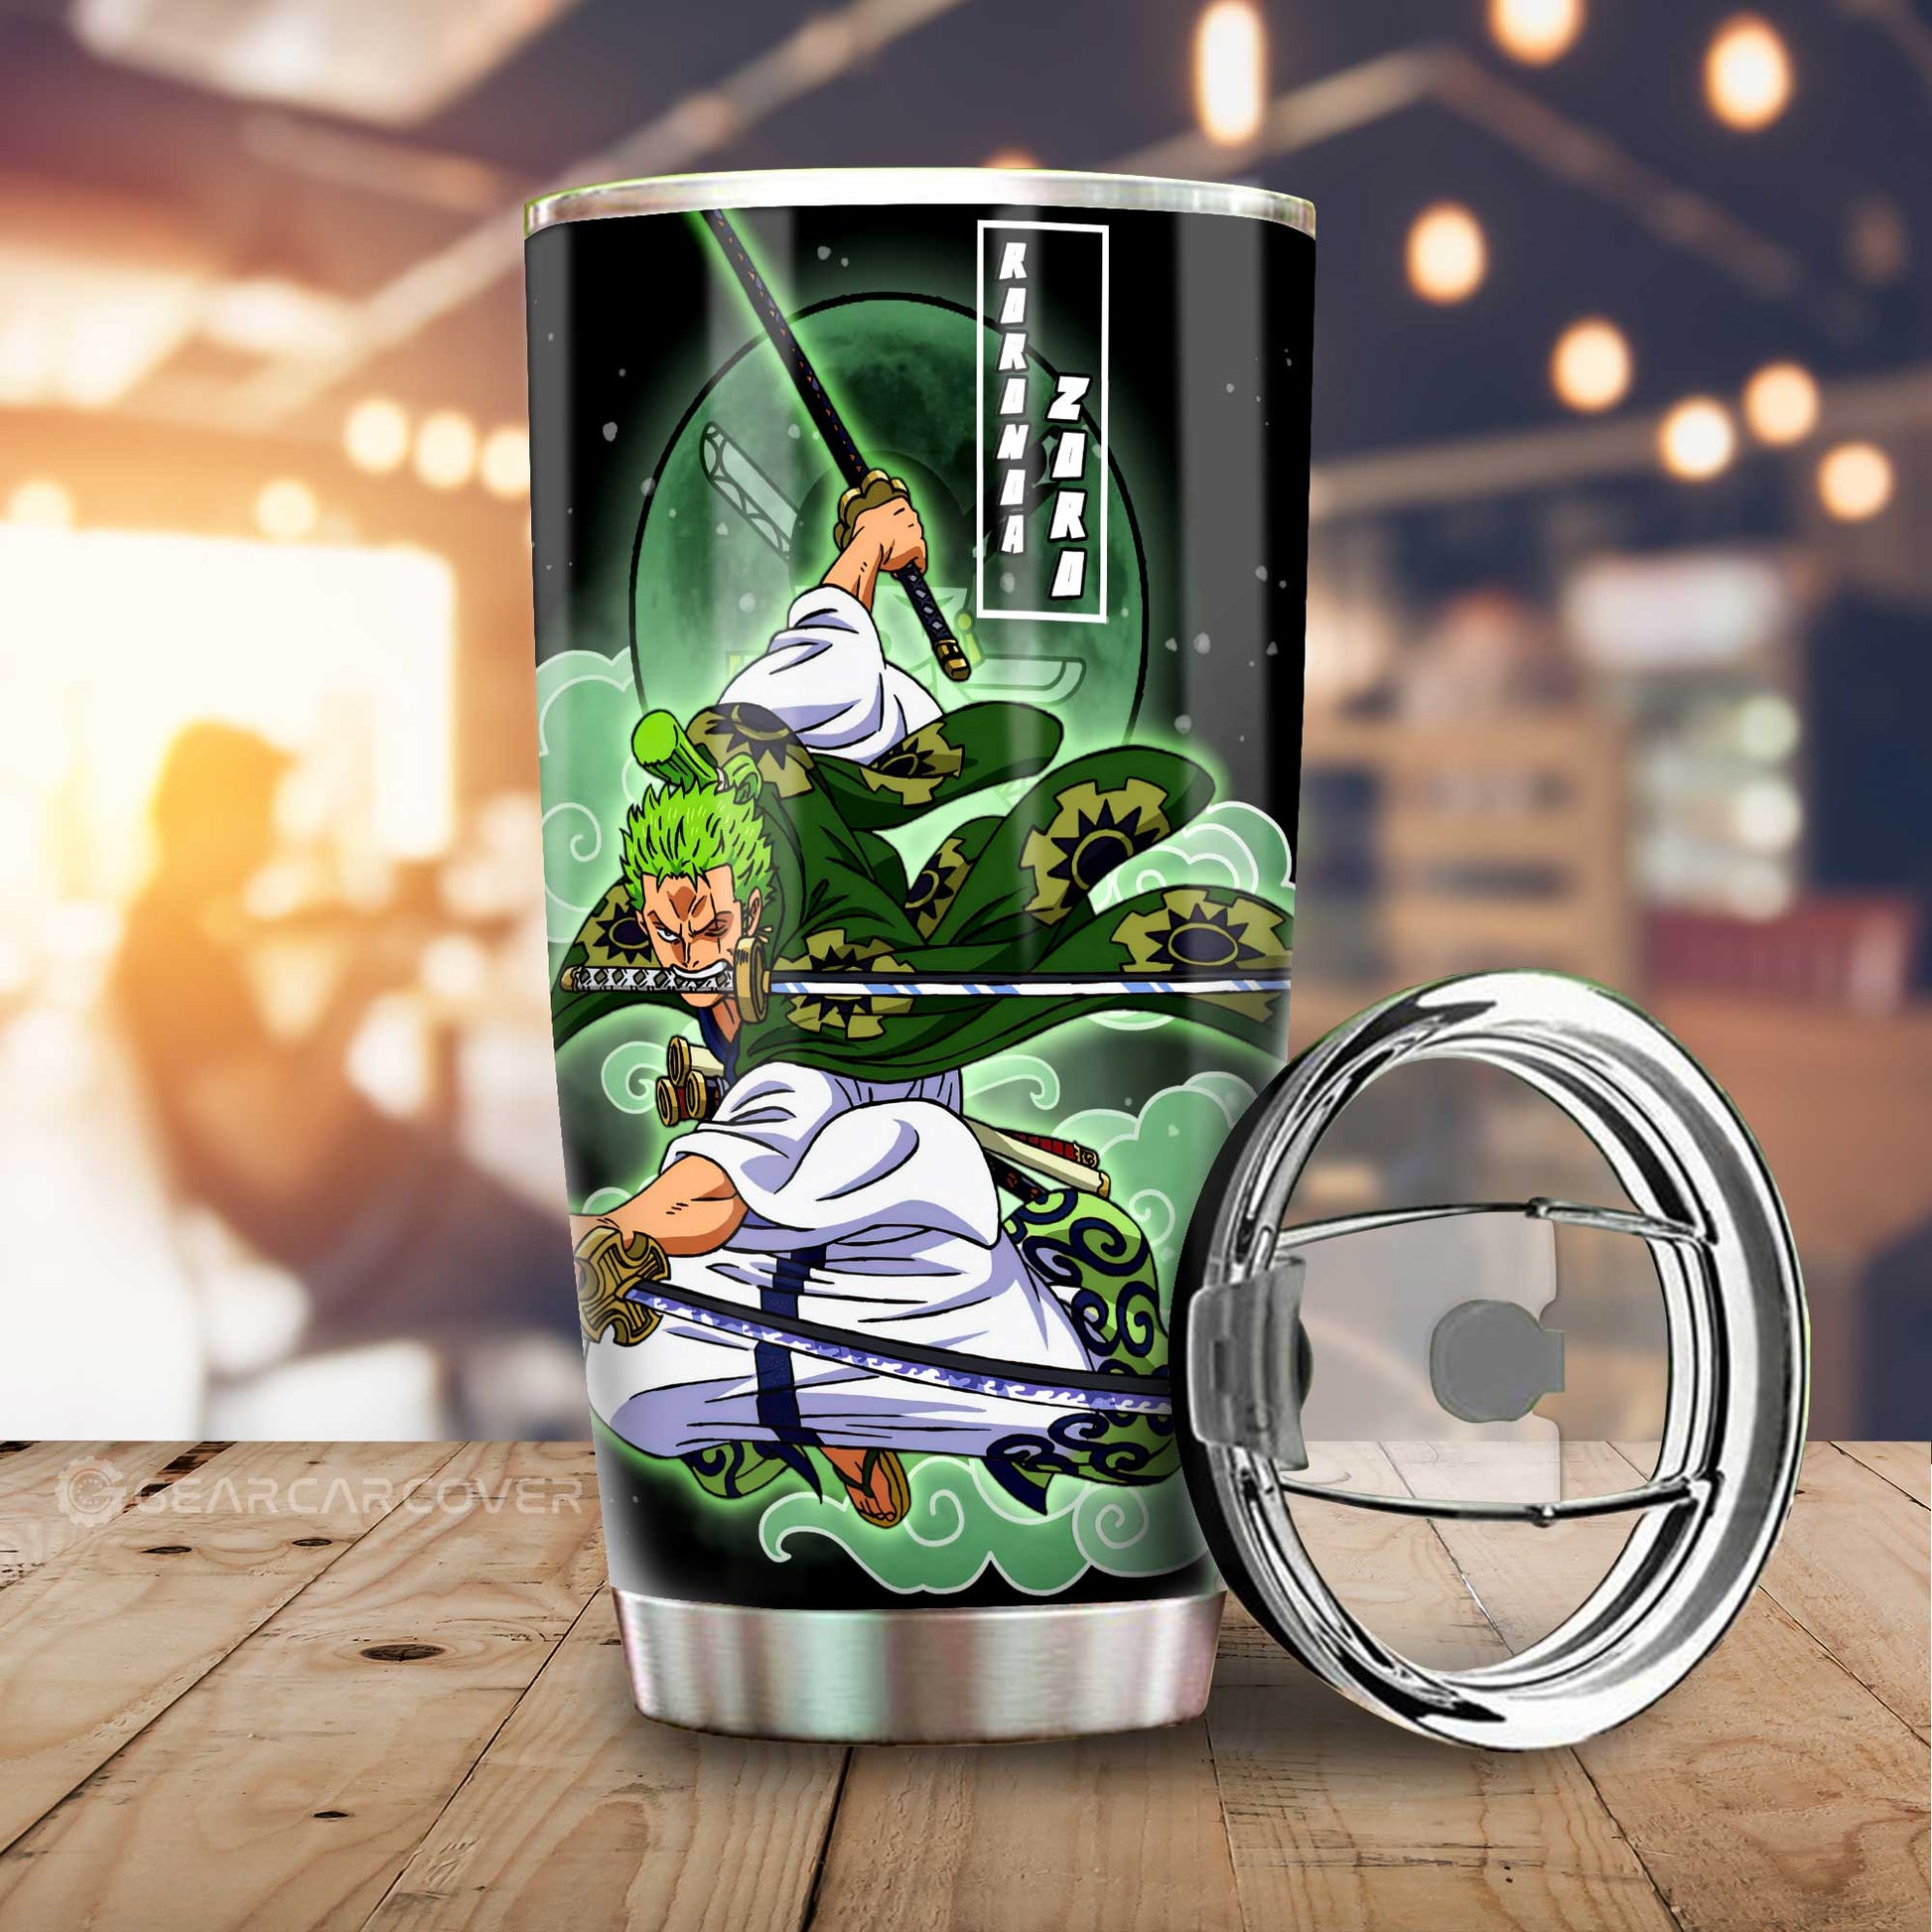 Zoro Wano Tumbler Cup Custom Anime One Piece Car Accessories For Anime Fans - Gearcarcover - 1